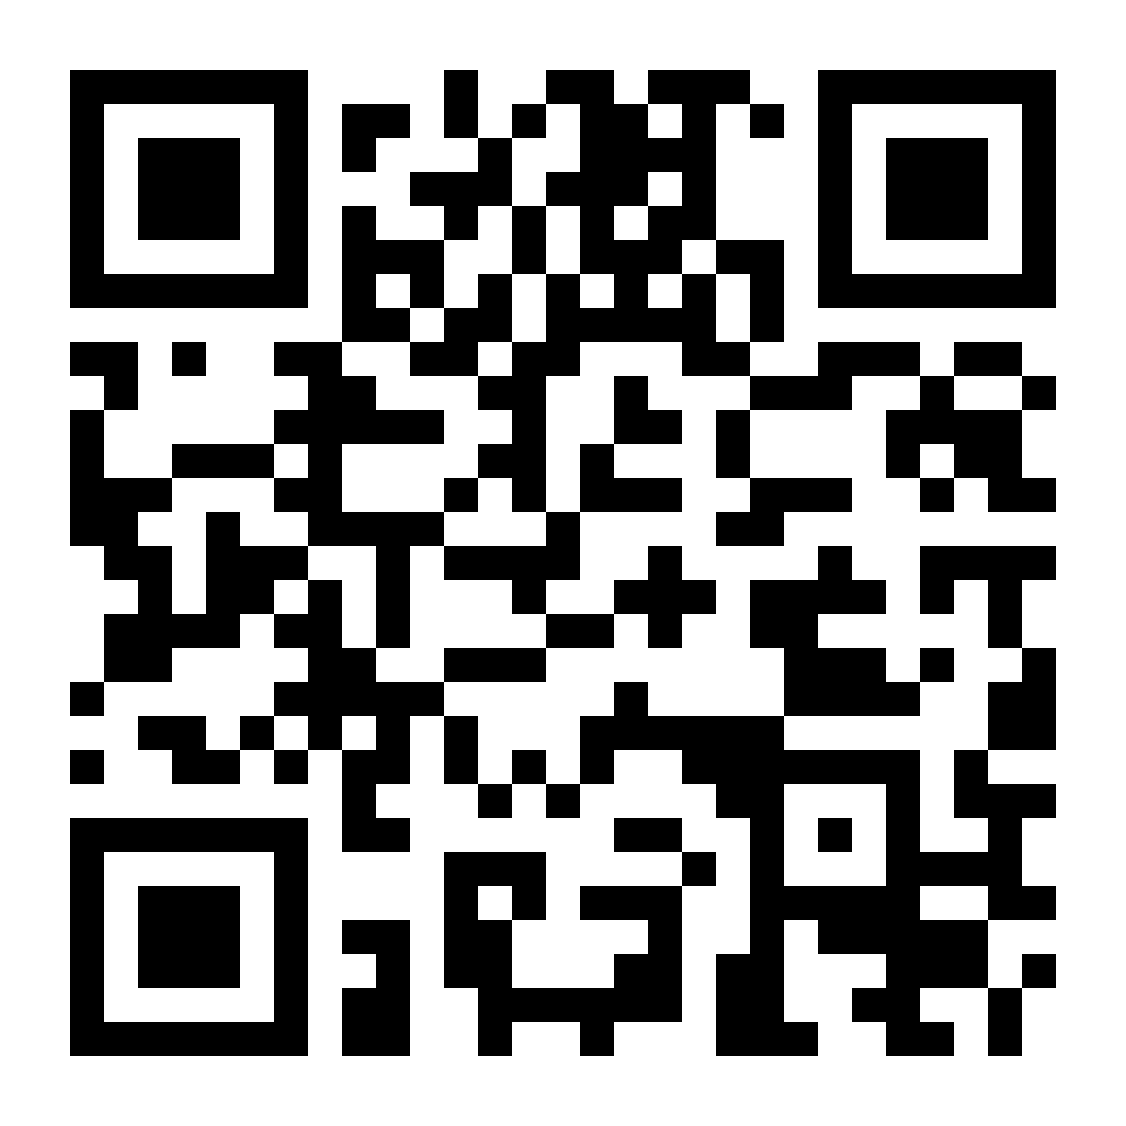 QRcode_SitoES_hp